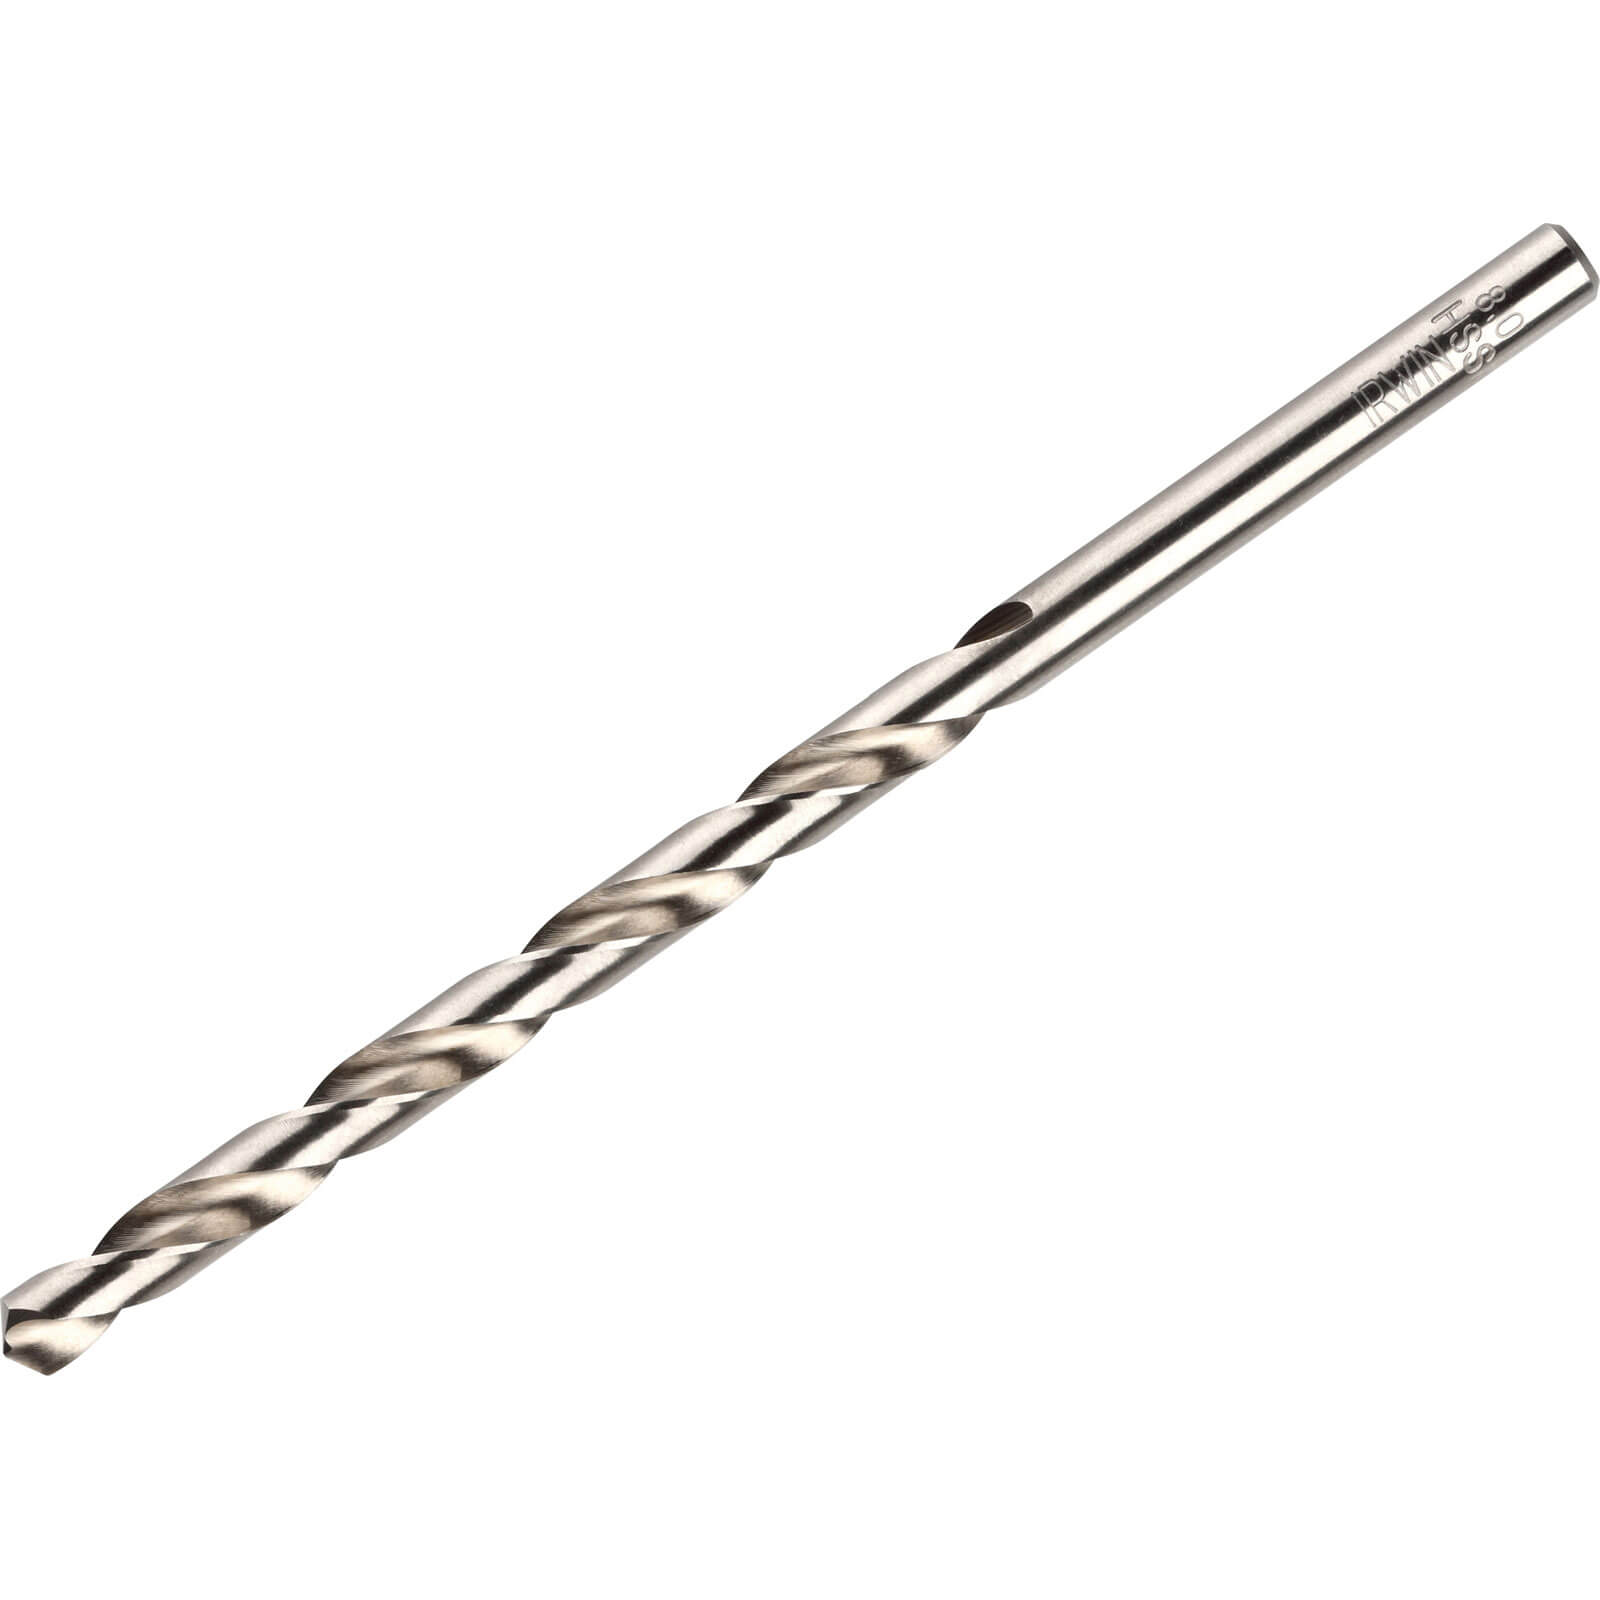 Image of Irwin HSS Pro Drill Bits 13mm Pack of 5